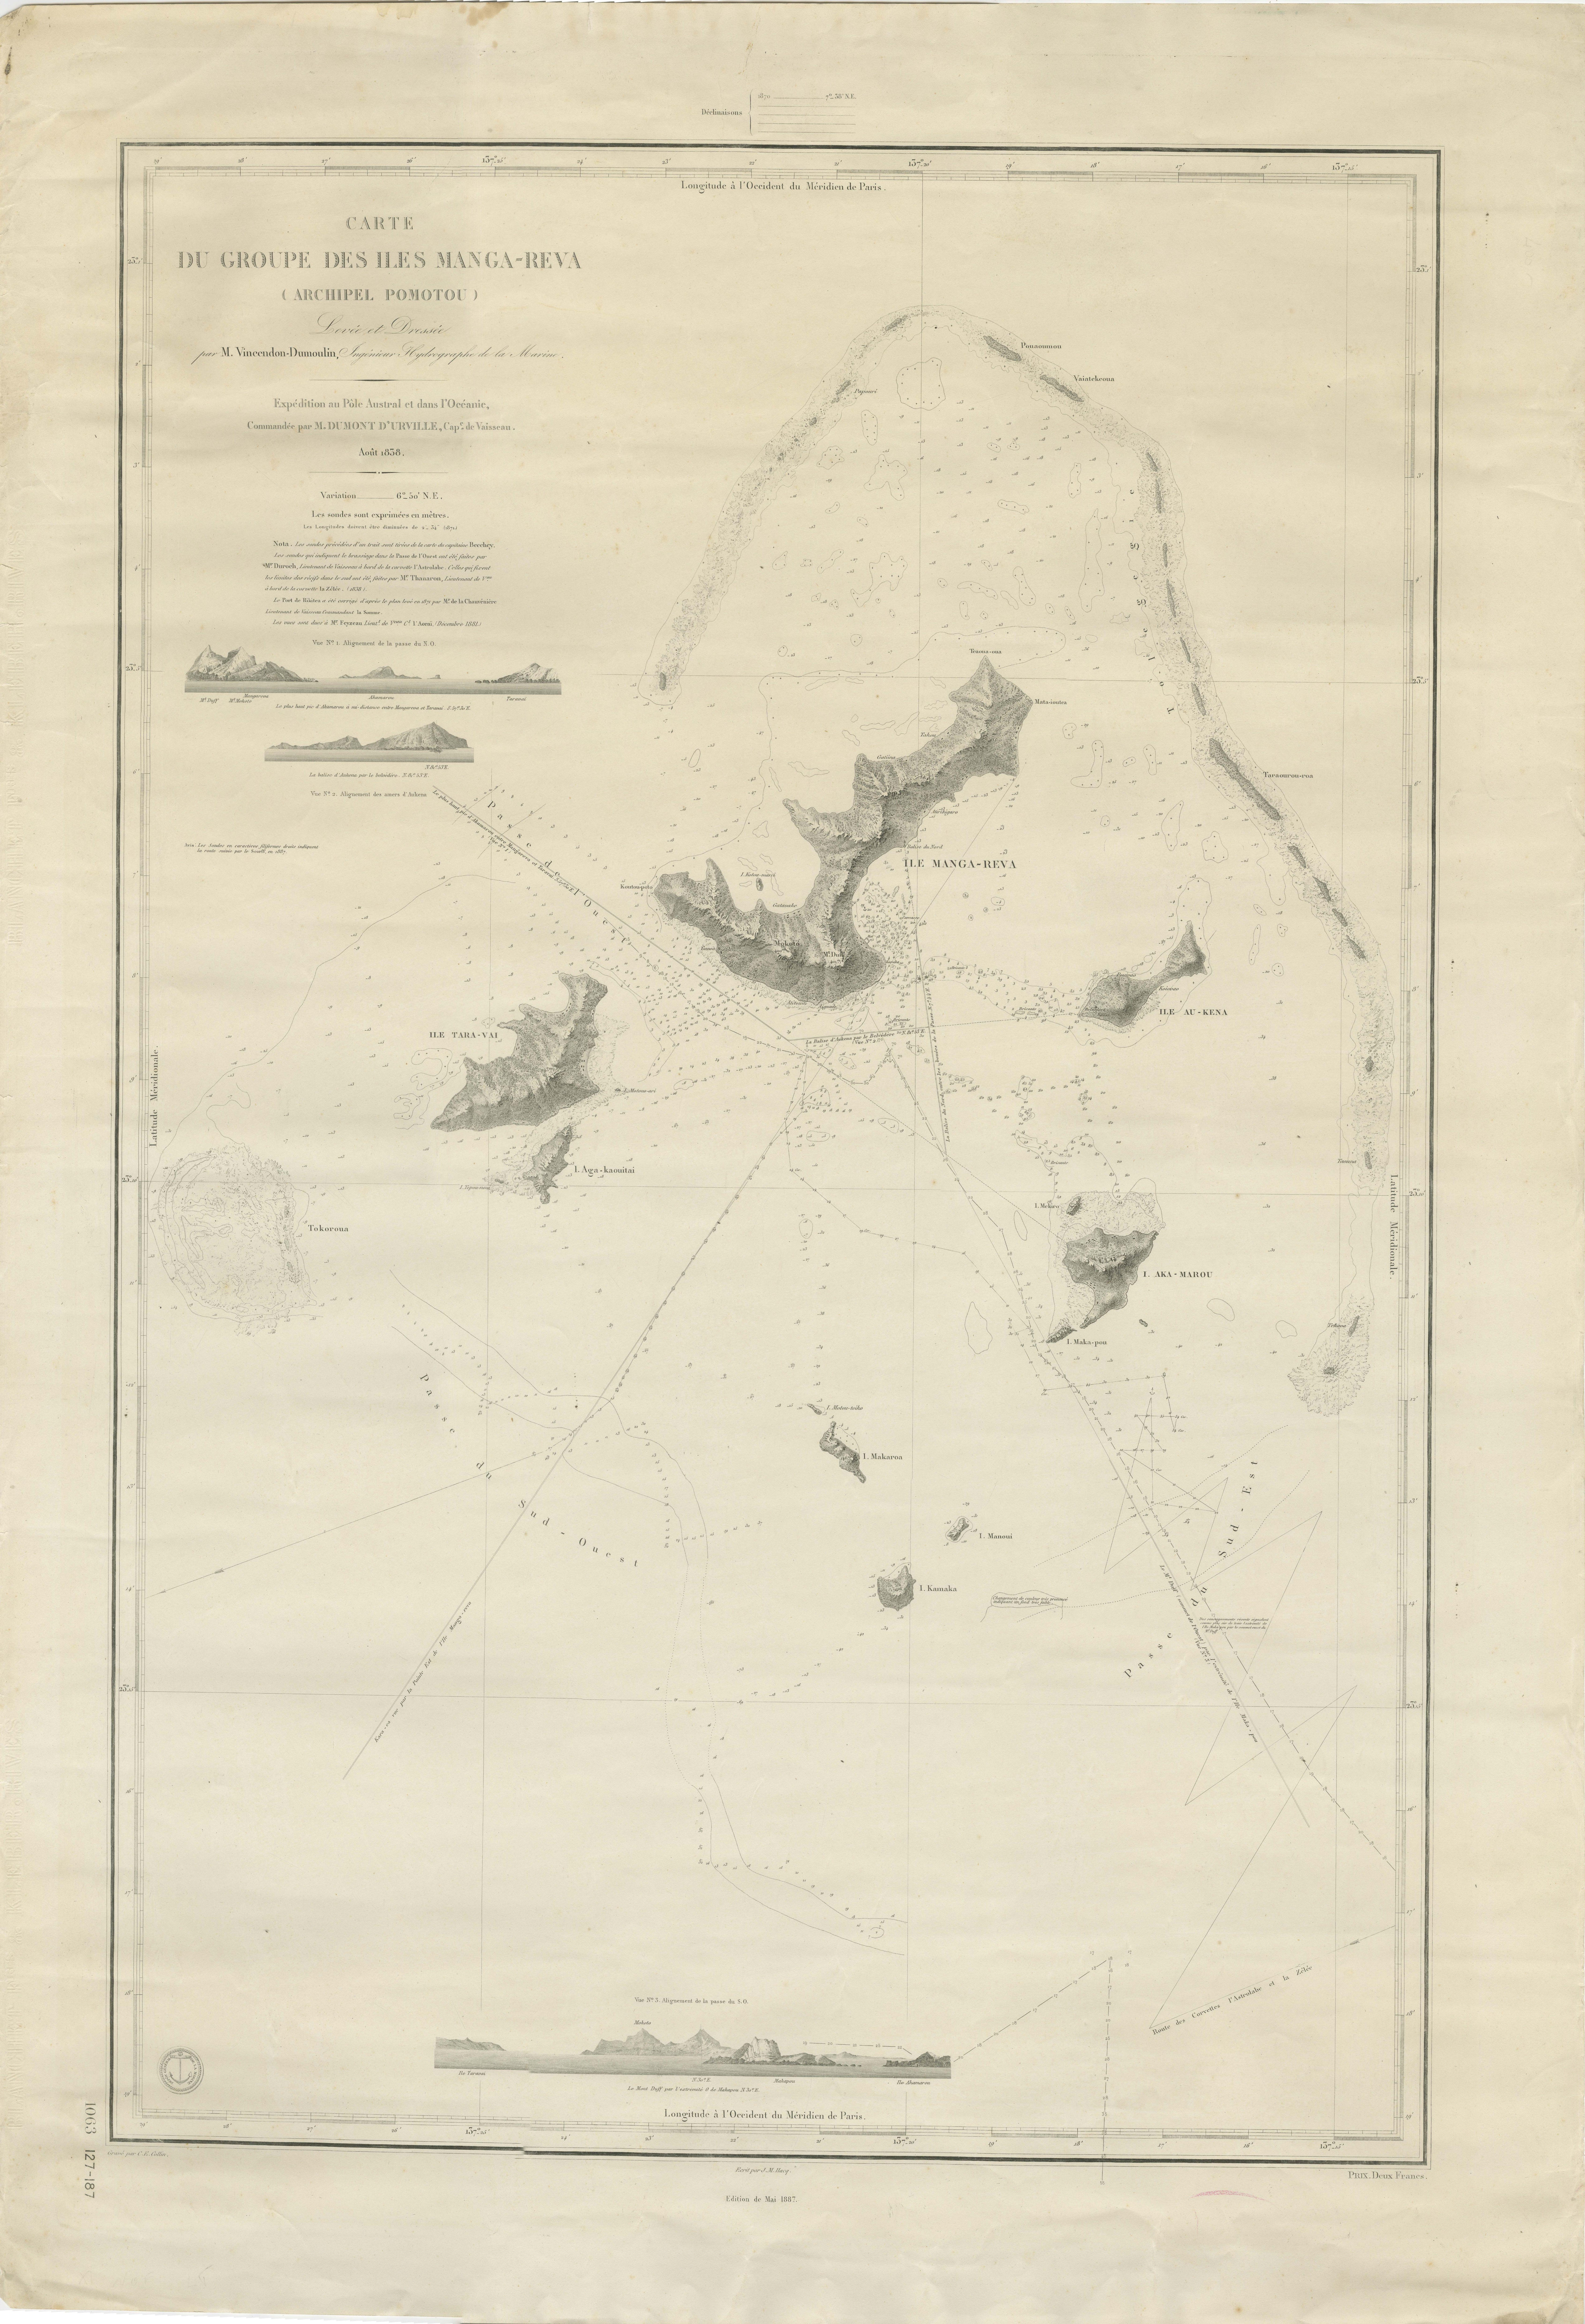 Antique map titled 'Carte du Groupe des Iles Manga-Reva (Archipel Pomotou)'. Large chart of the Tuamotu Archipelago, French Îles Tuamotu, also called Paumotu, island group of French Polynesia, central South Pacific Ocean. This map focuses on the